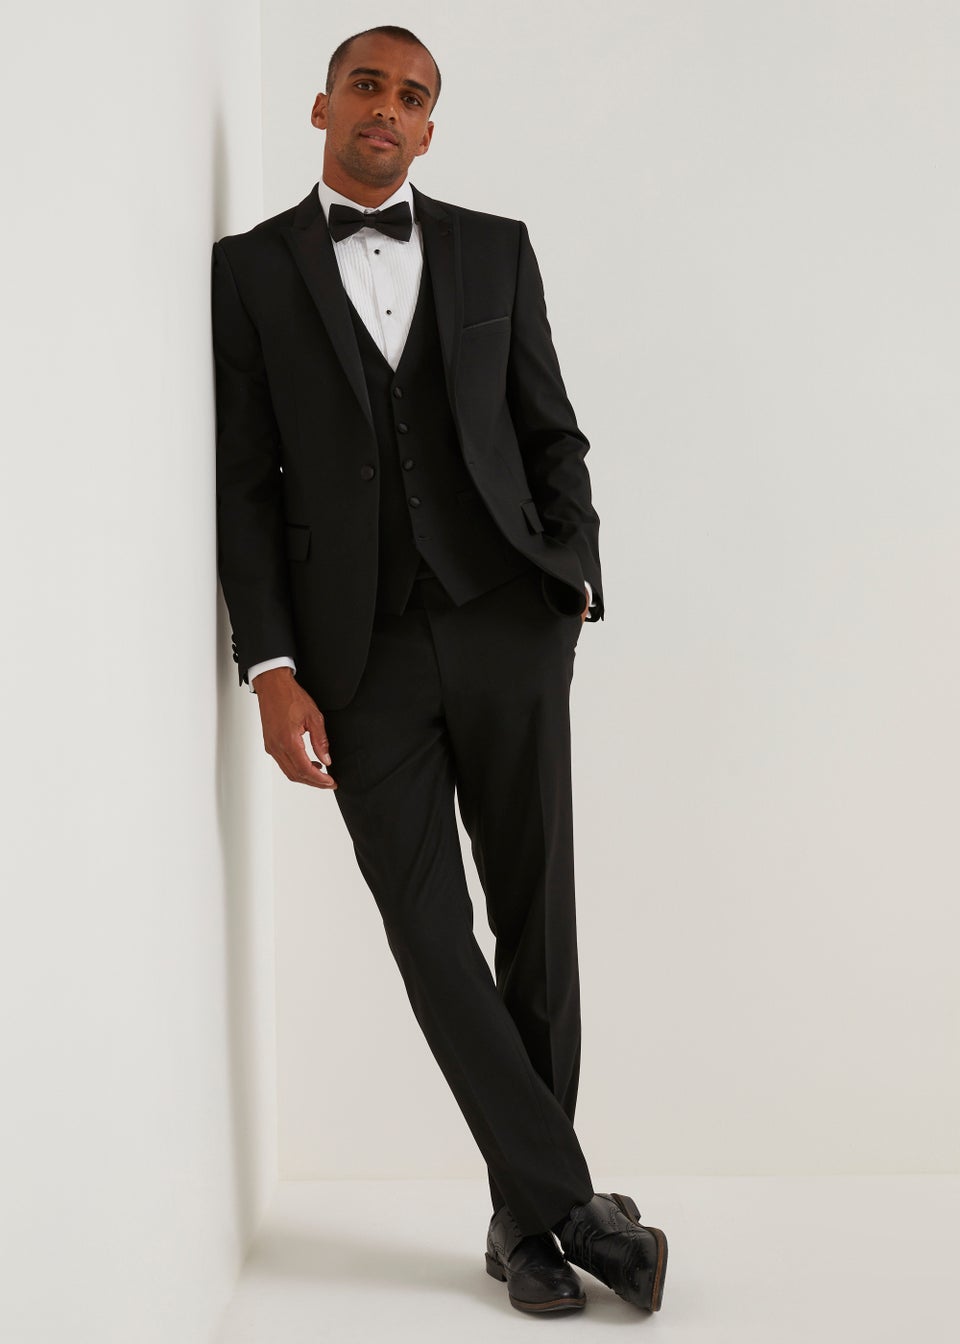 Taylor & Wright Black Tailored Fit Dinner Suit Jacket - Matalan